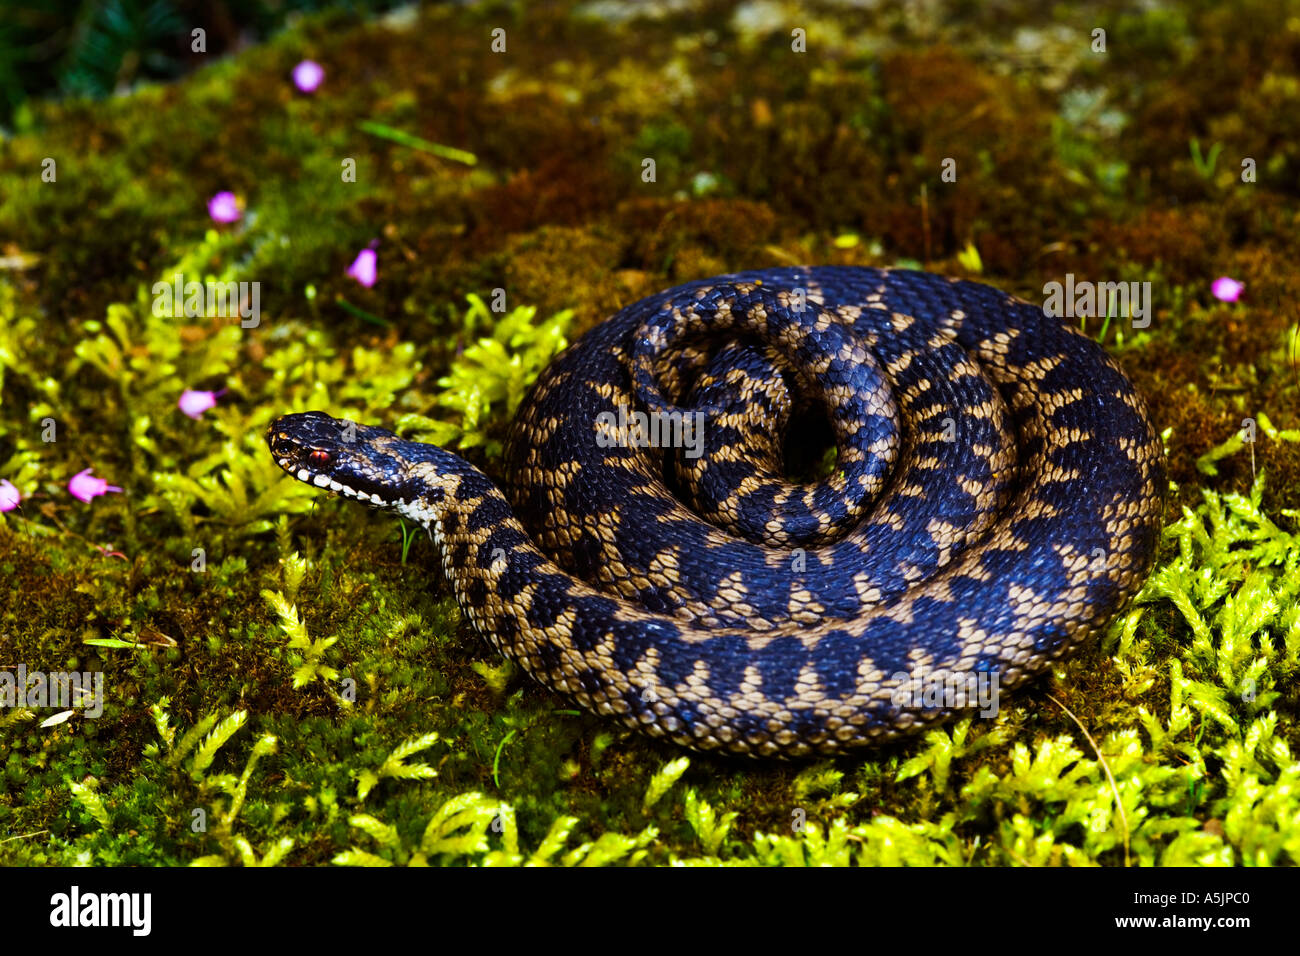 Adder Vipera berus coiled ready to strike on moss covered stone Stock Photo